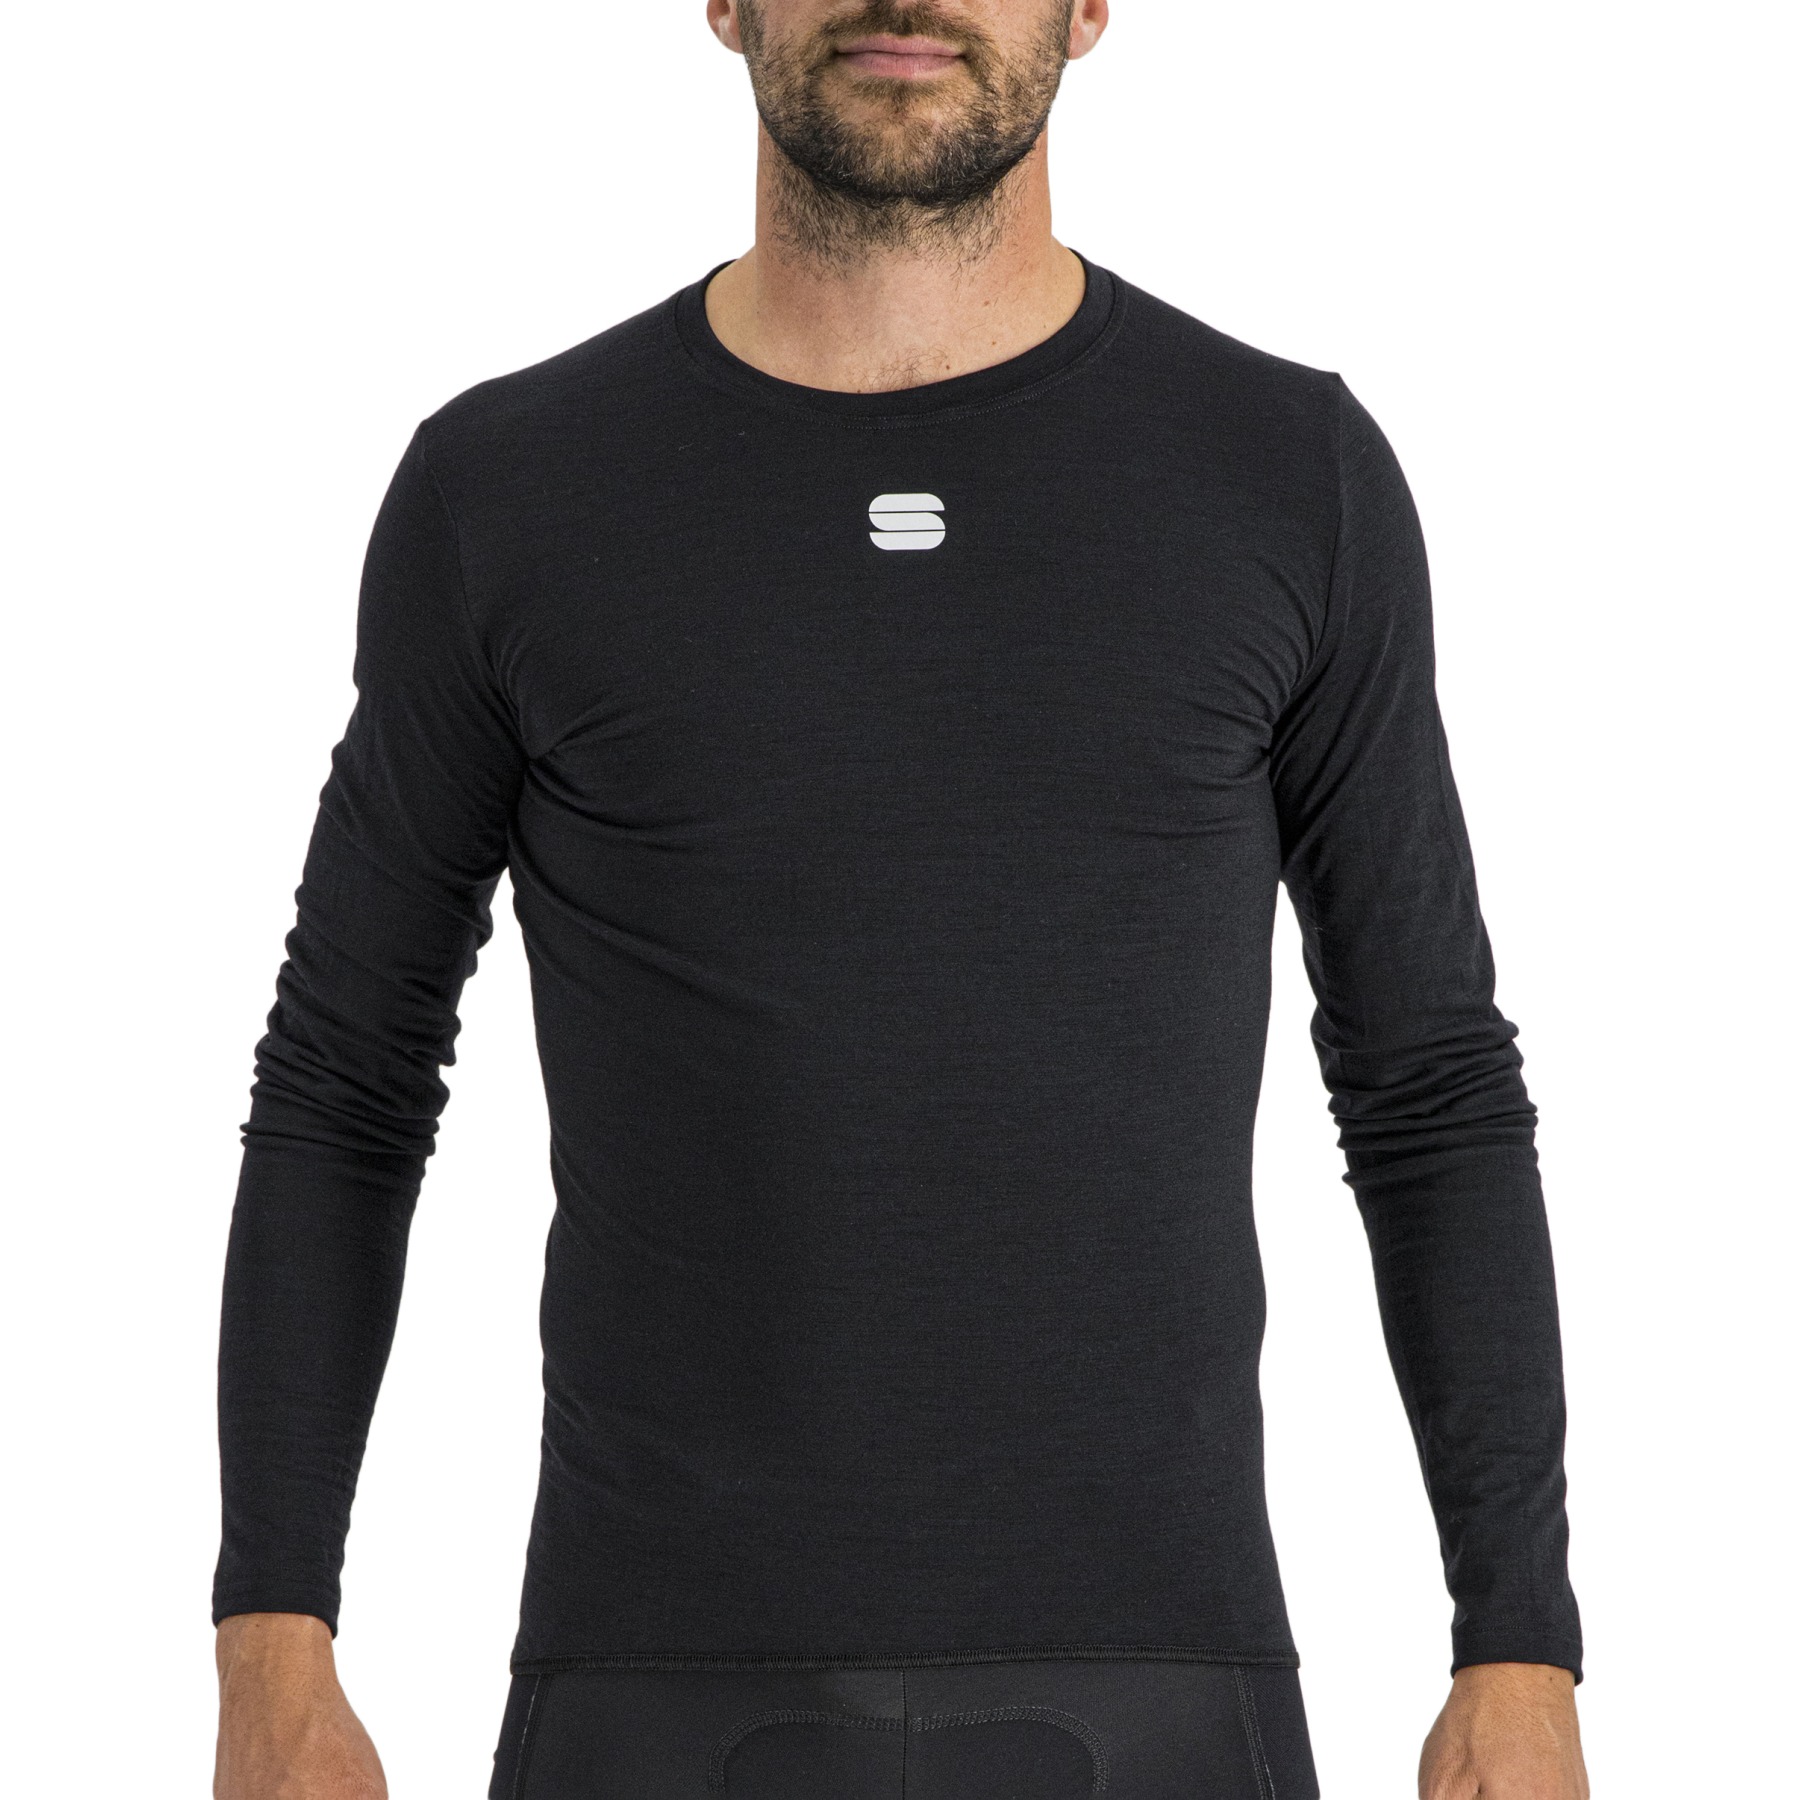 Picture of Sportful Merino Layer Tee Long Sleeves - 002 Black